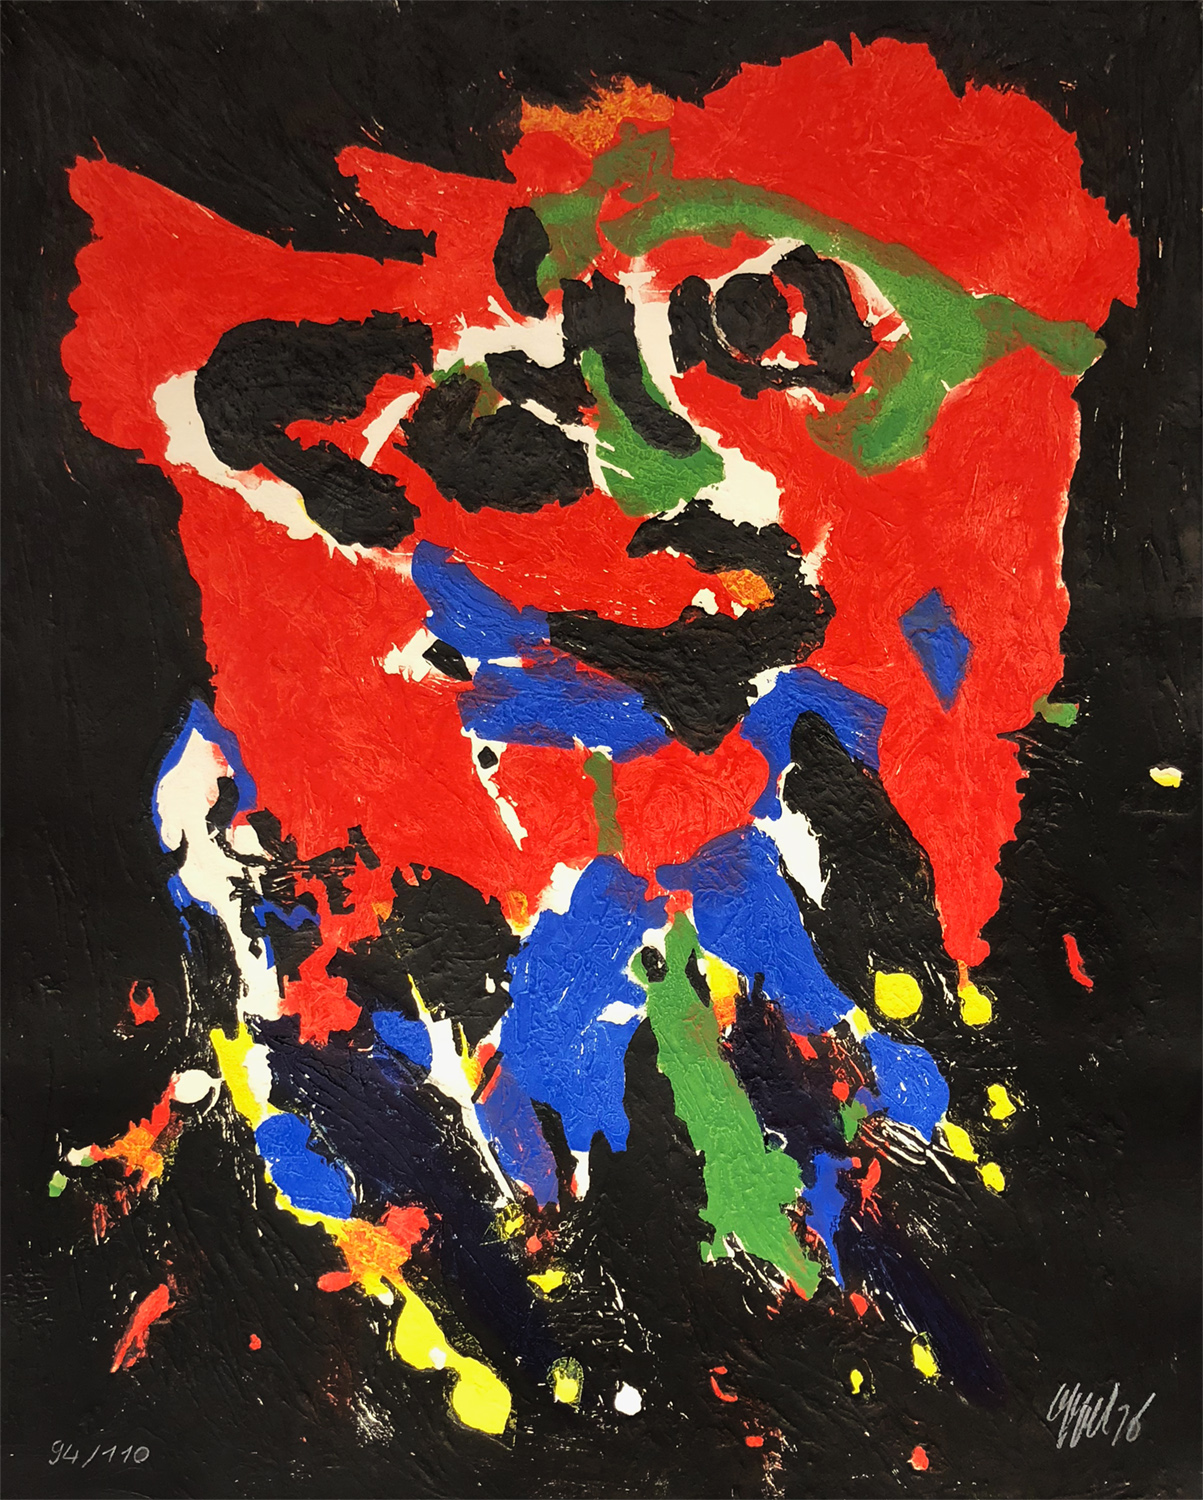 Karel Appel print with colorful abstracted figure on black background cropped